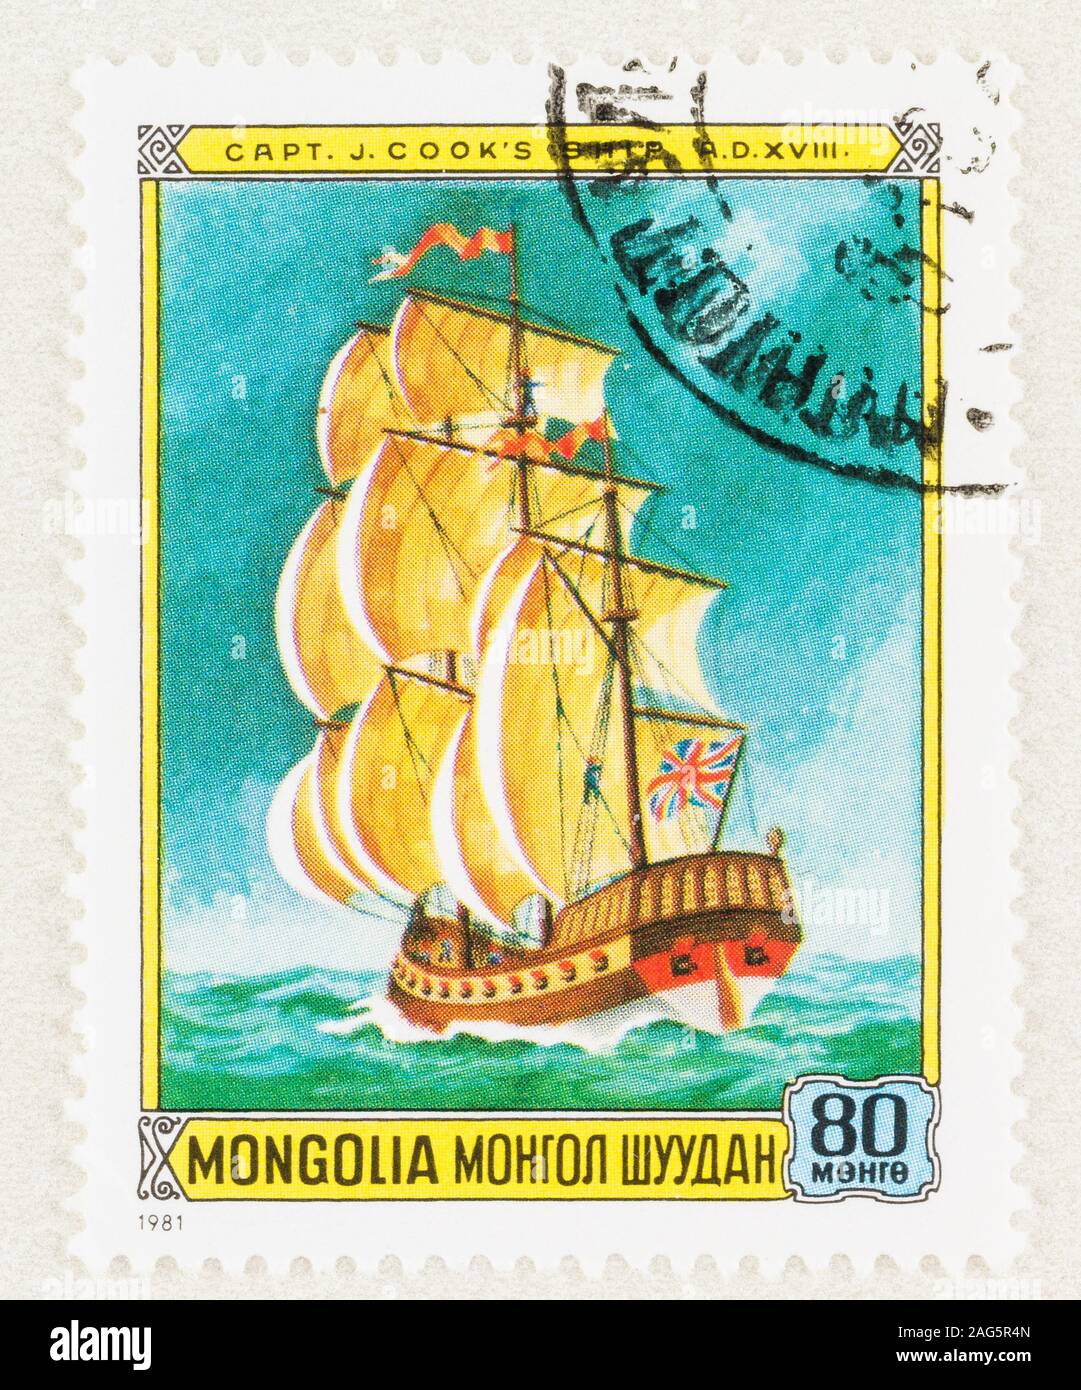 Sailing ship of Captain Cook, the HMS Endeavor, on landlocked Mongolia postage stamp, issued in 1981. Scott # 1190 Stock Photo